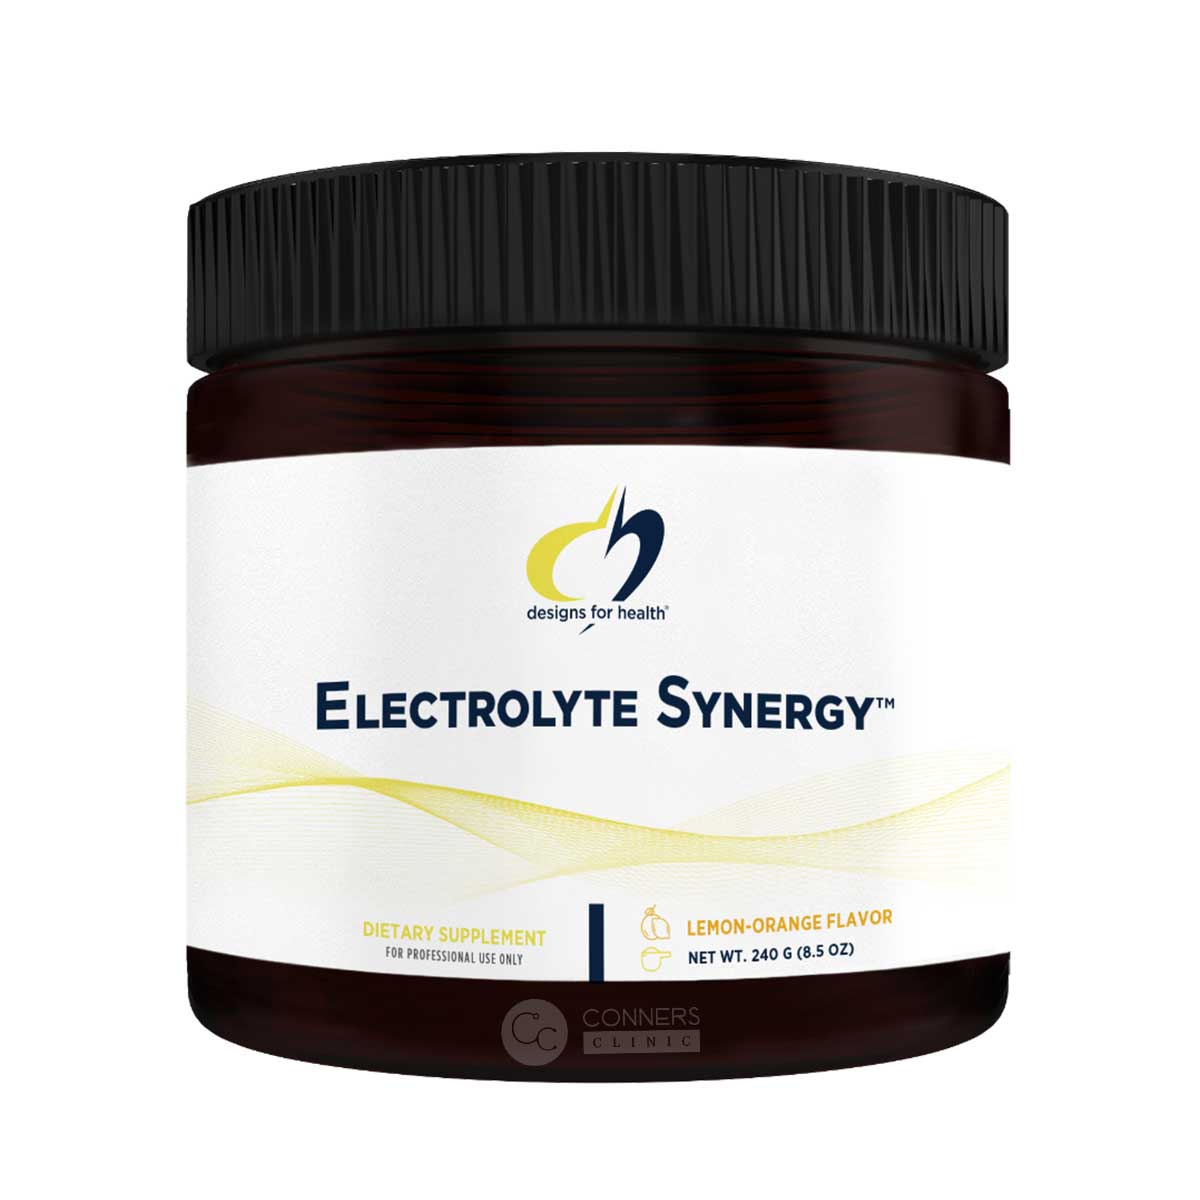 Electrolyte Synergy- 8.5 oz Designs for Health Supplement - Conners Clinic